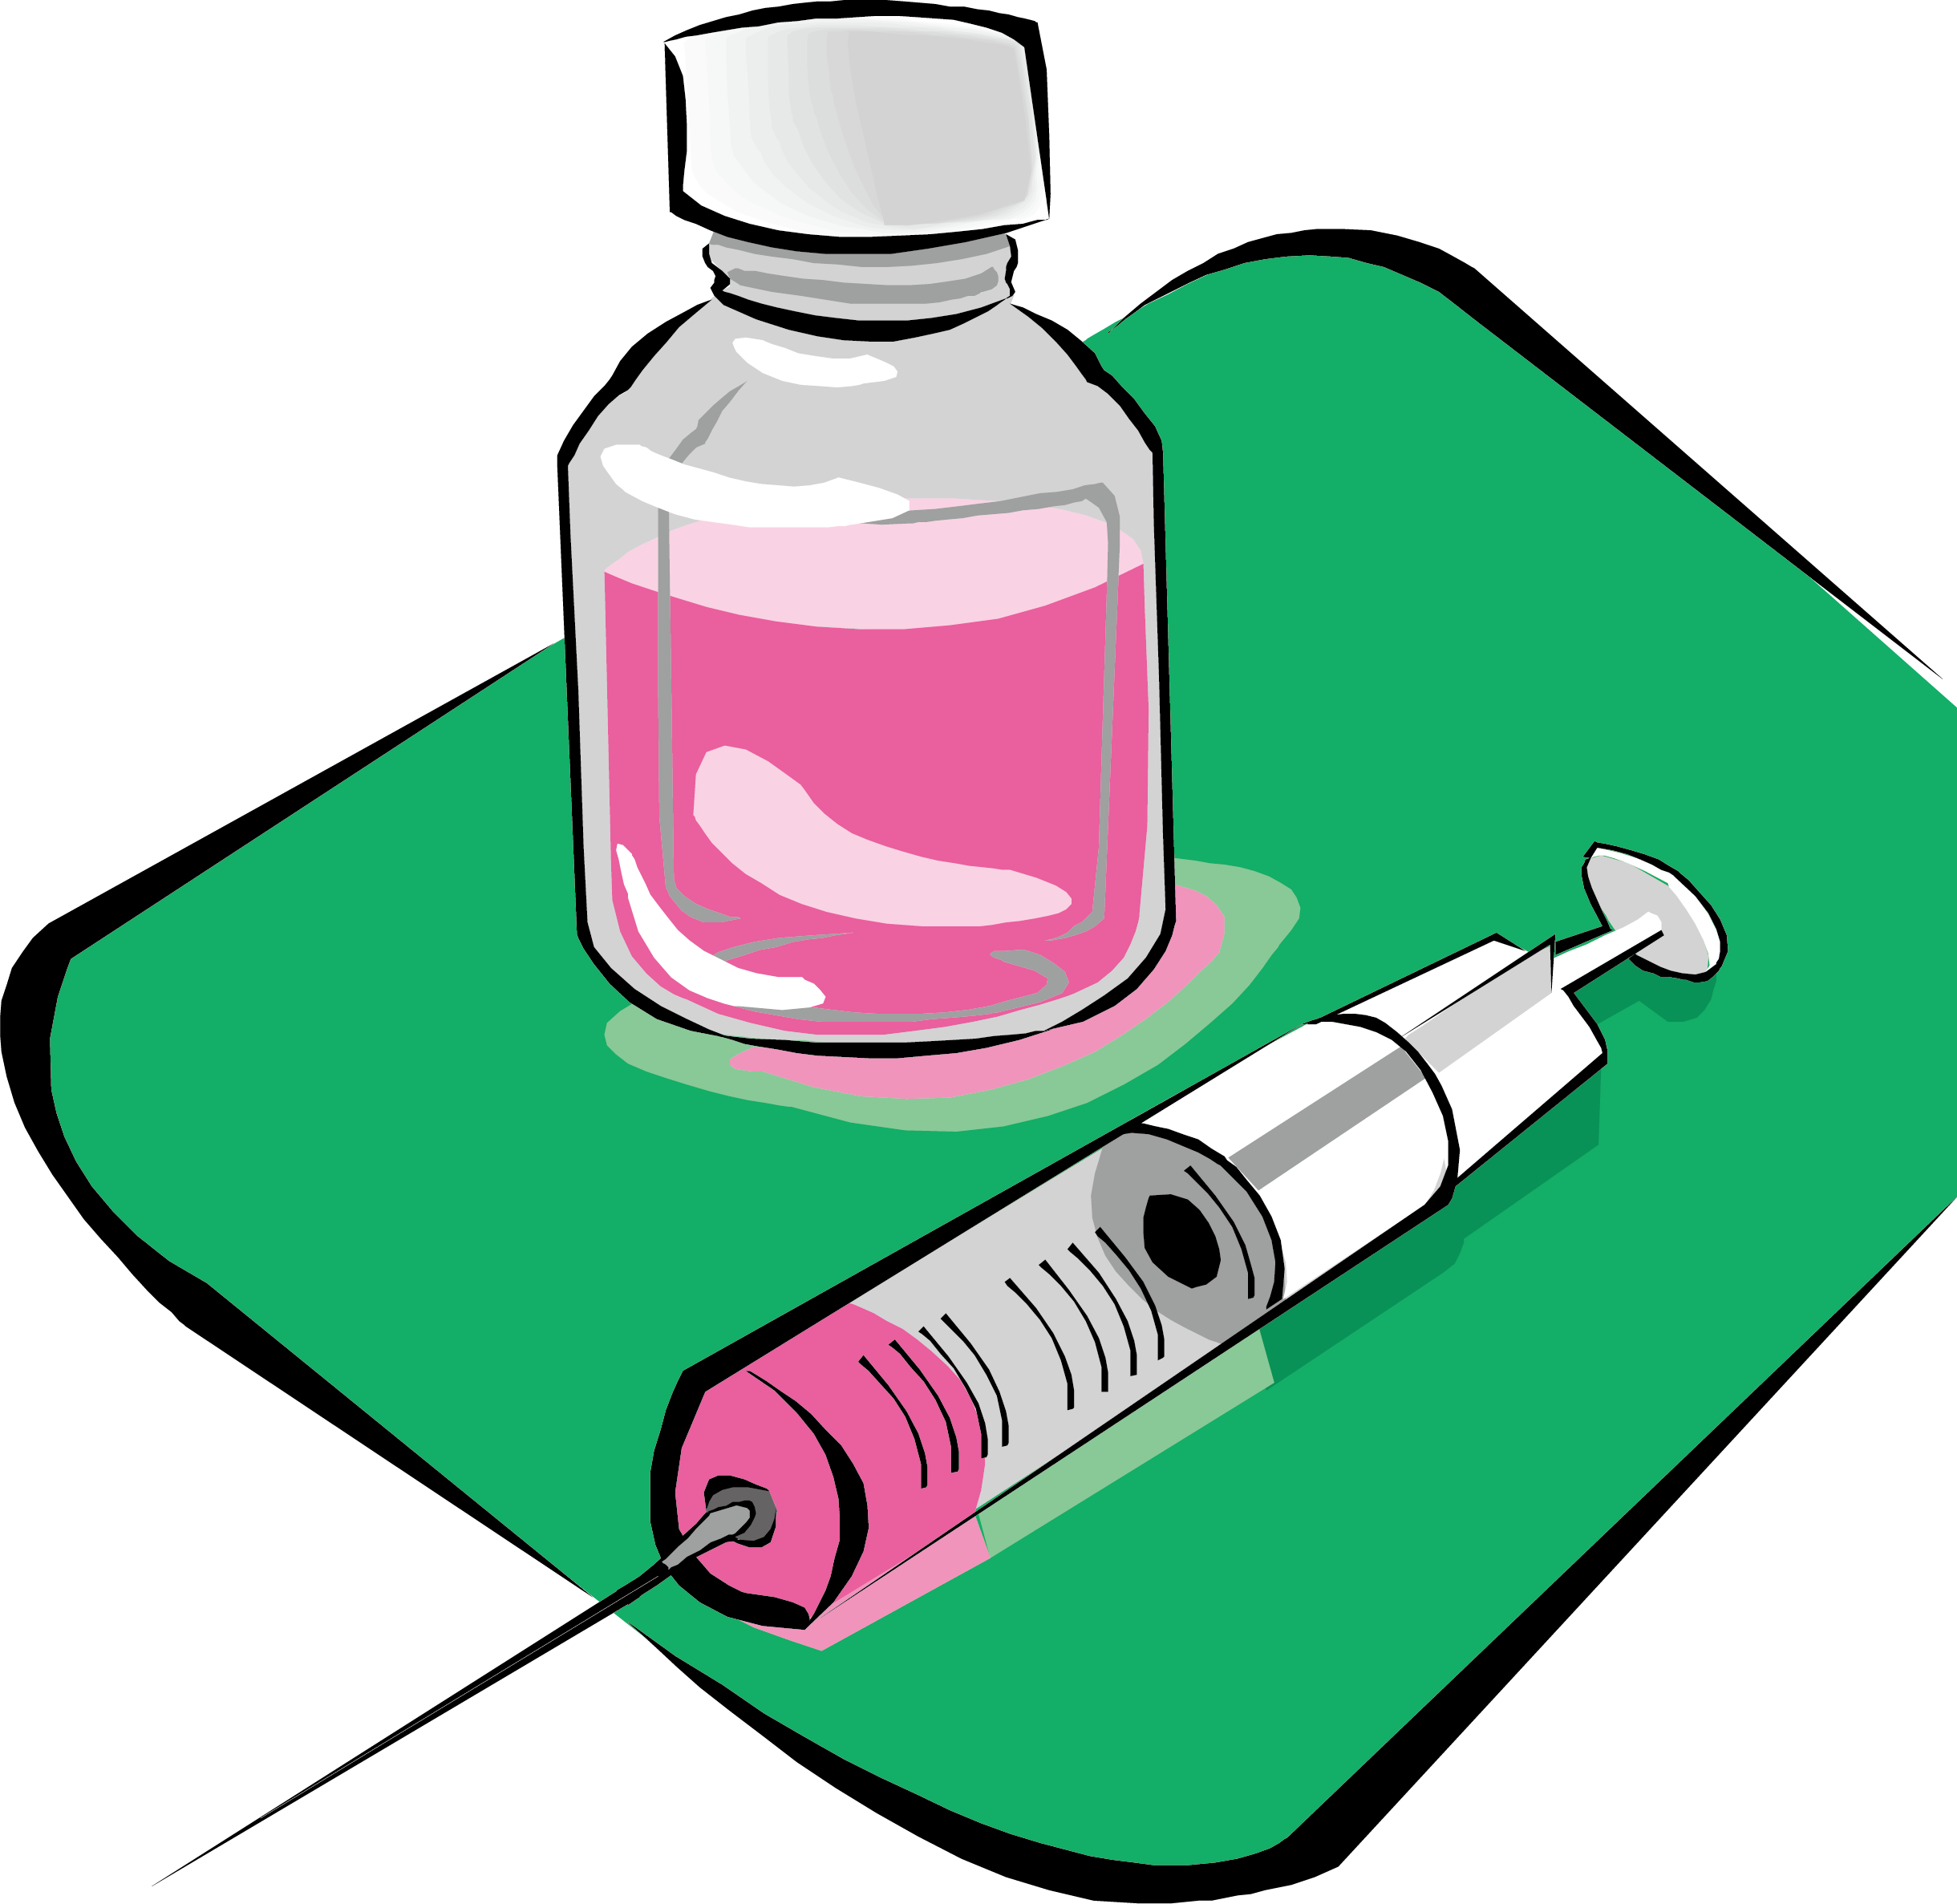 Sewing drawing syringe transprent. Needle clipart medical